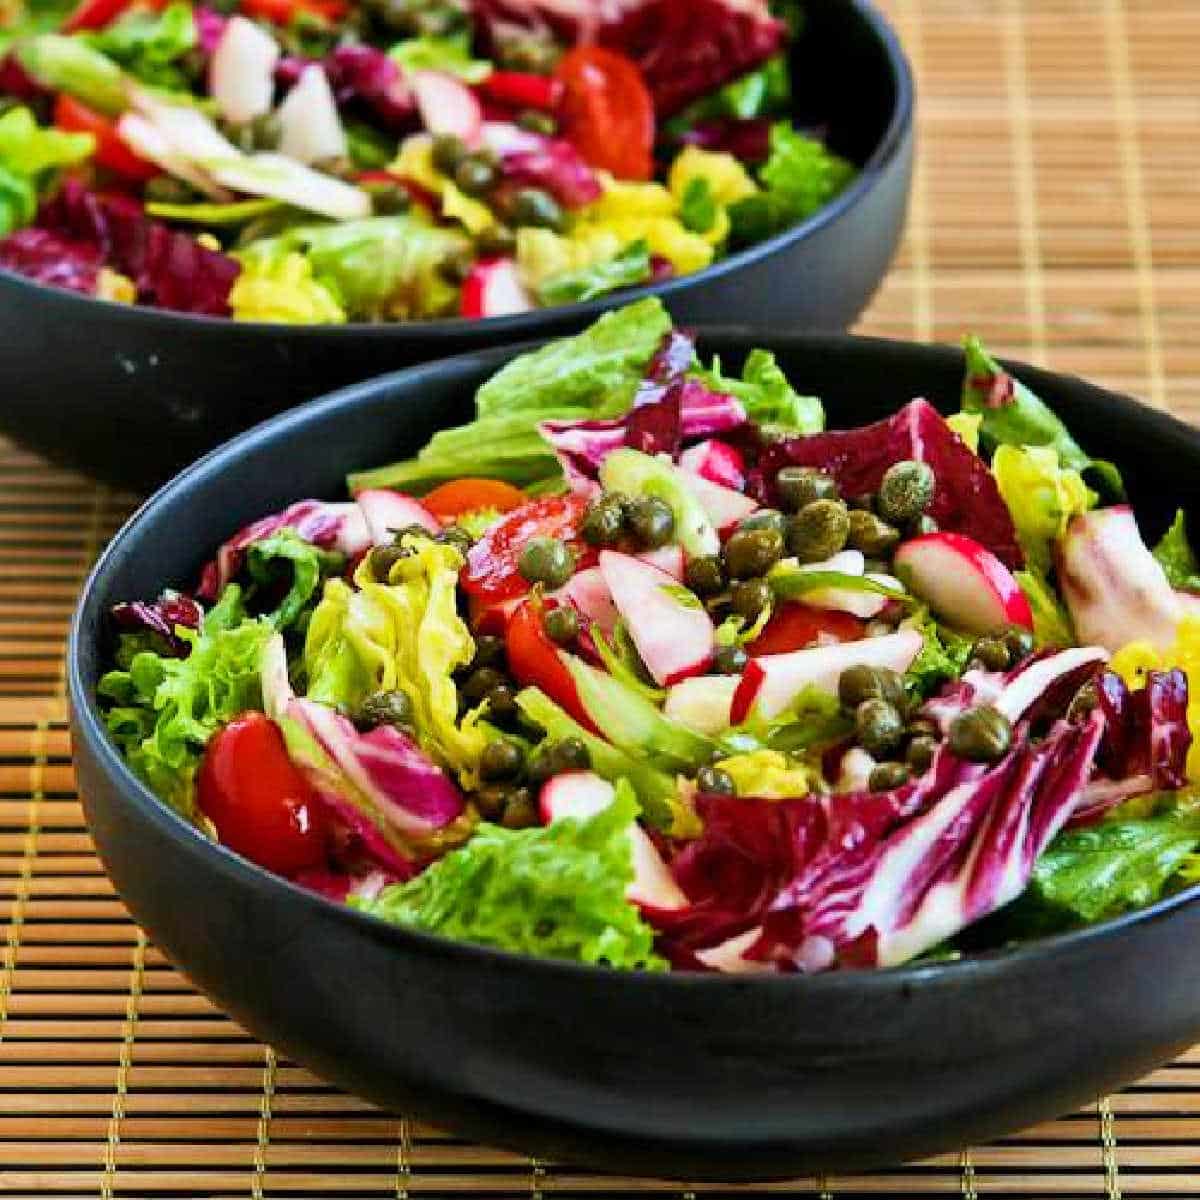 Ottolenghi's Perfect Lettuce Salad shown in two black bowls.